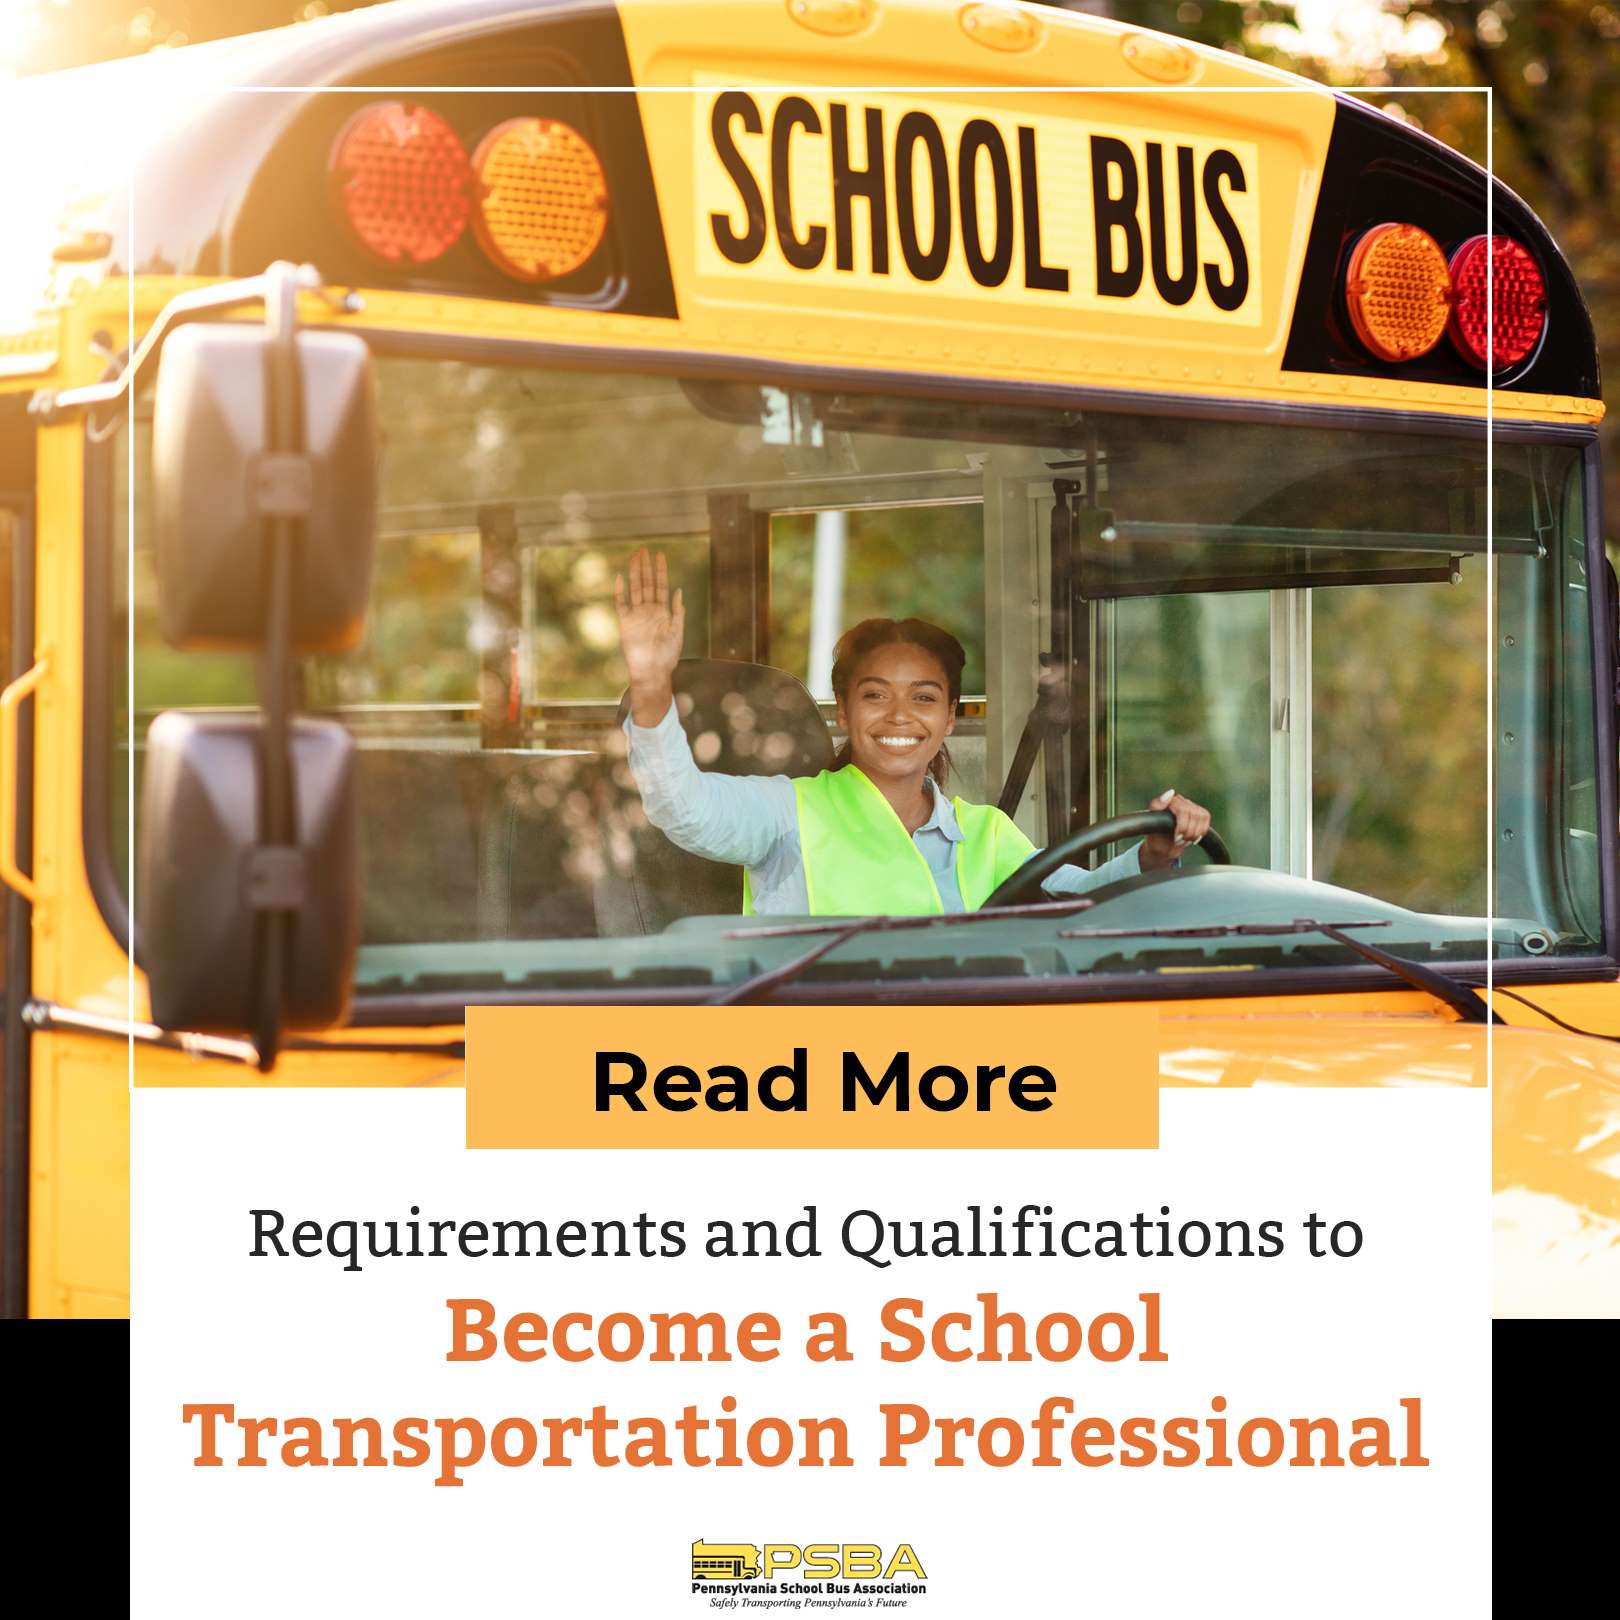 Requirements and Qualifications to Become a School Transportation Professional